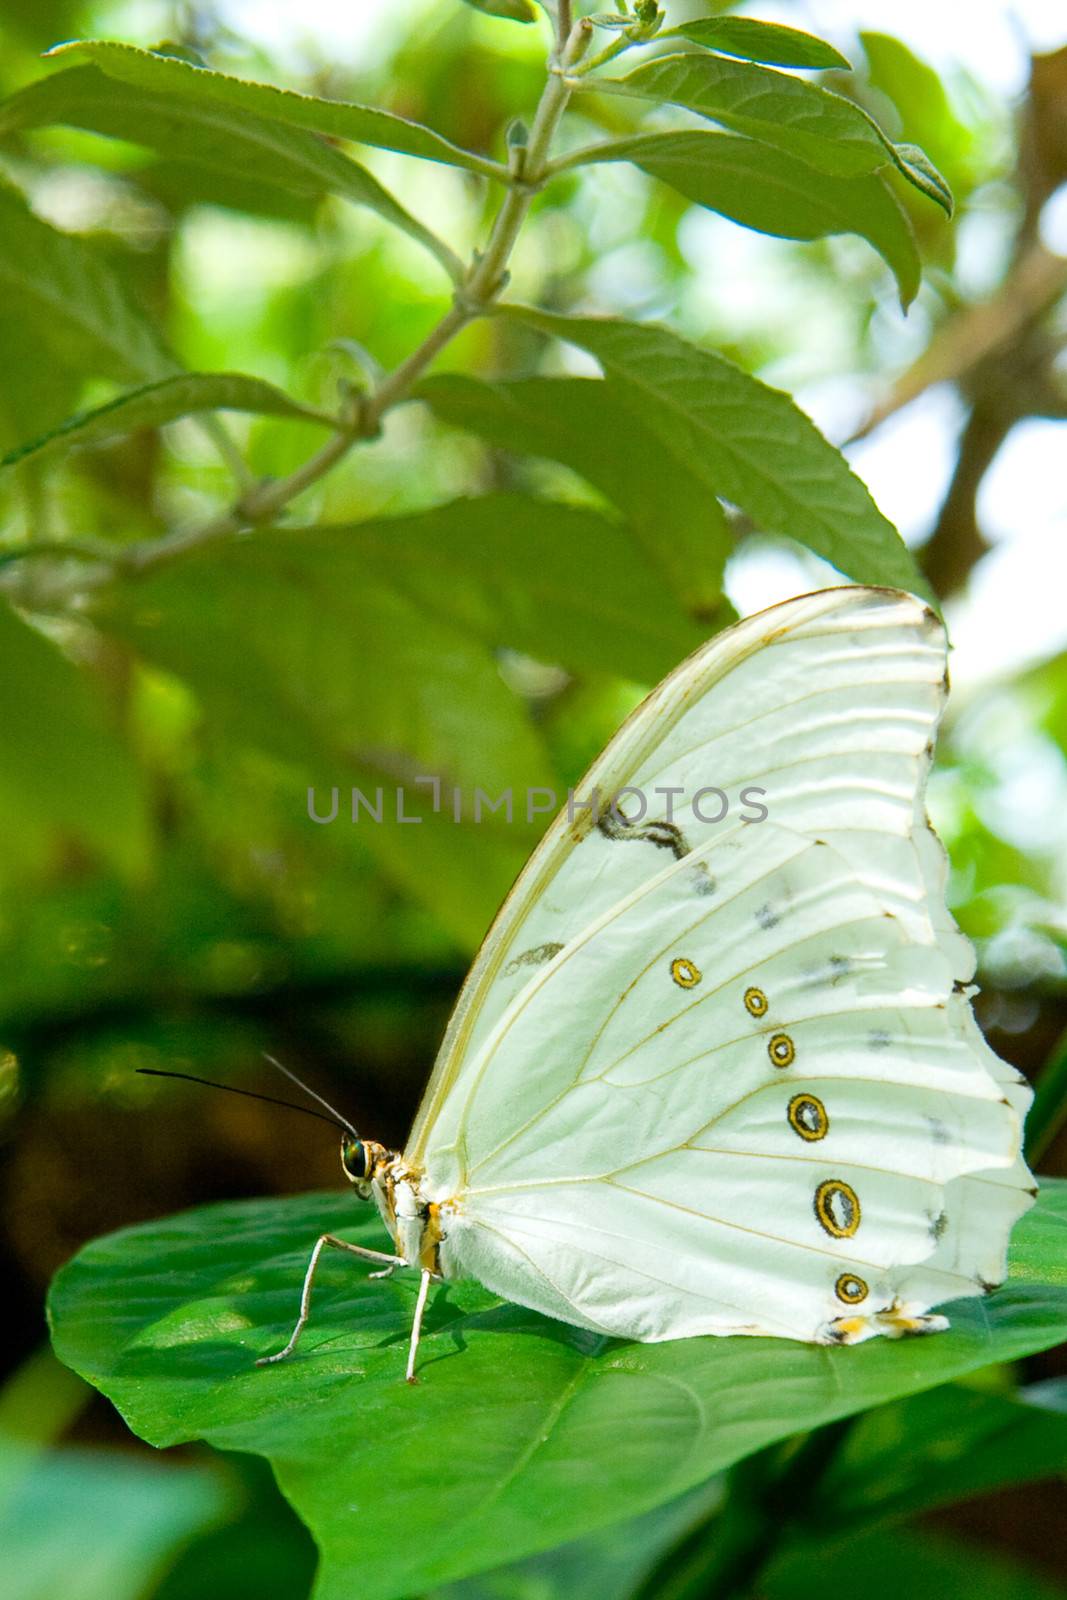 White Morpho butterfly resting on a green leaf.